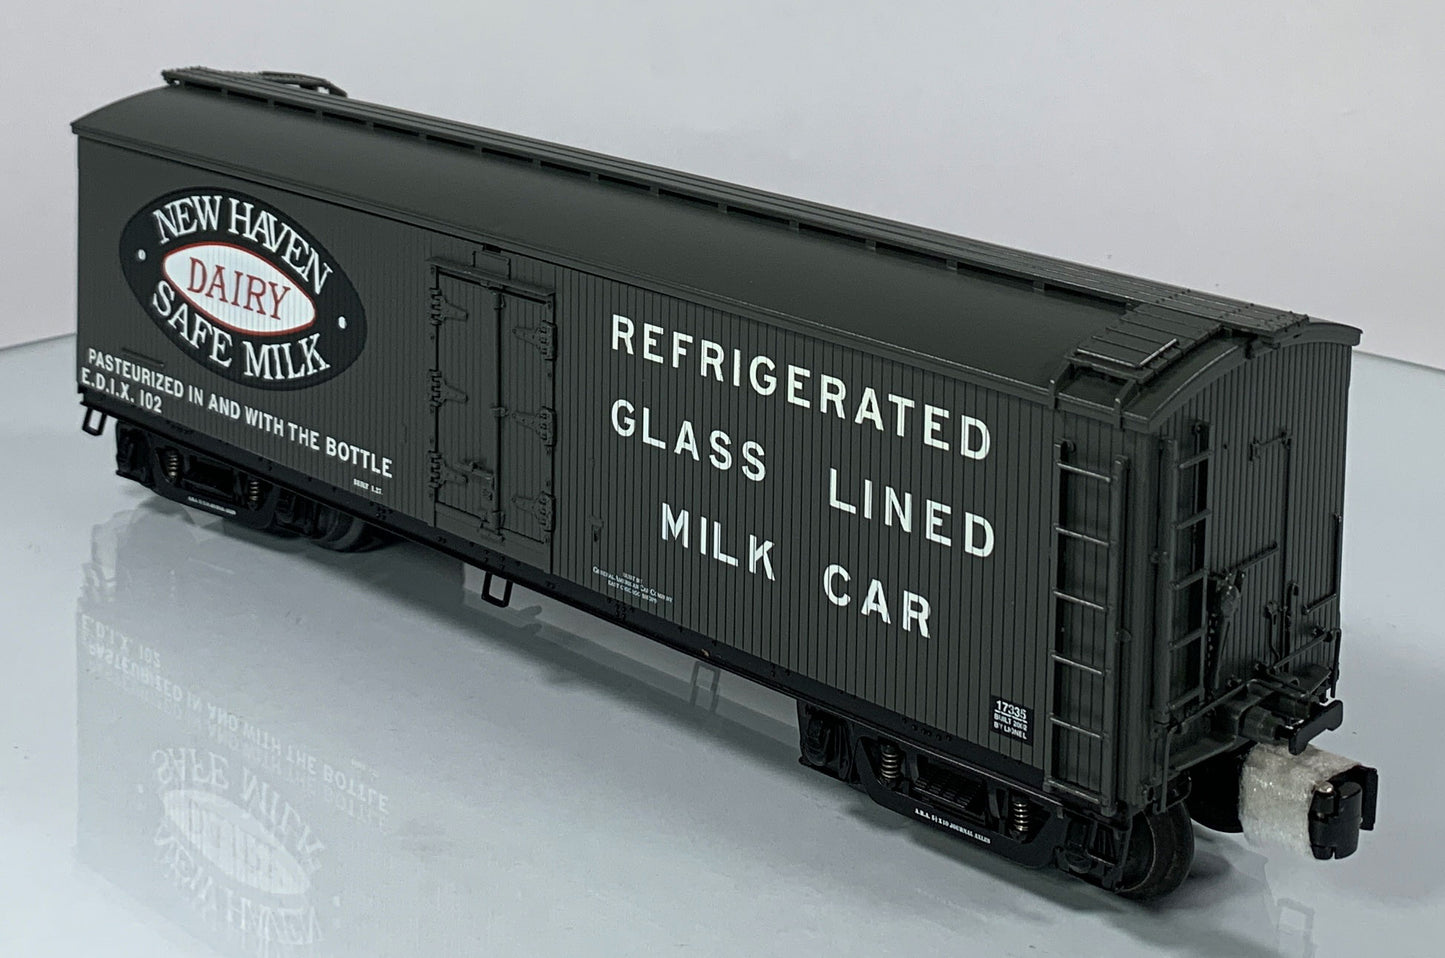 LIONEL • O GAUGE • 2002 New Haven Dairy Milk Car 6-17335 • NEW OLD STOCK